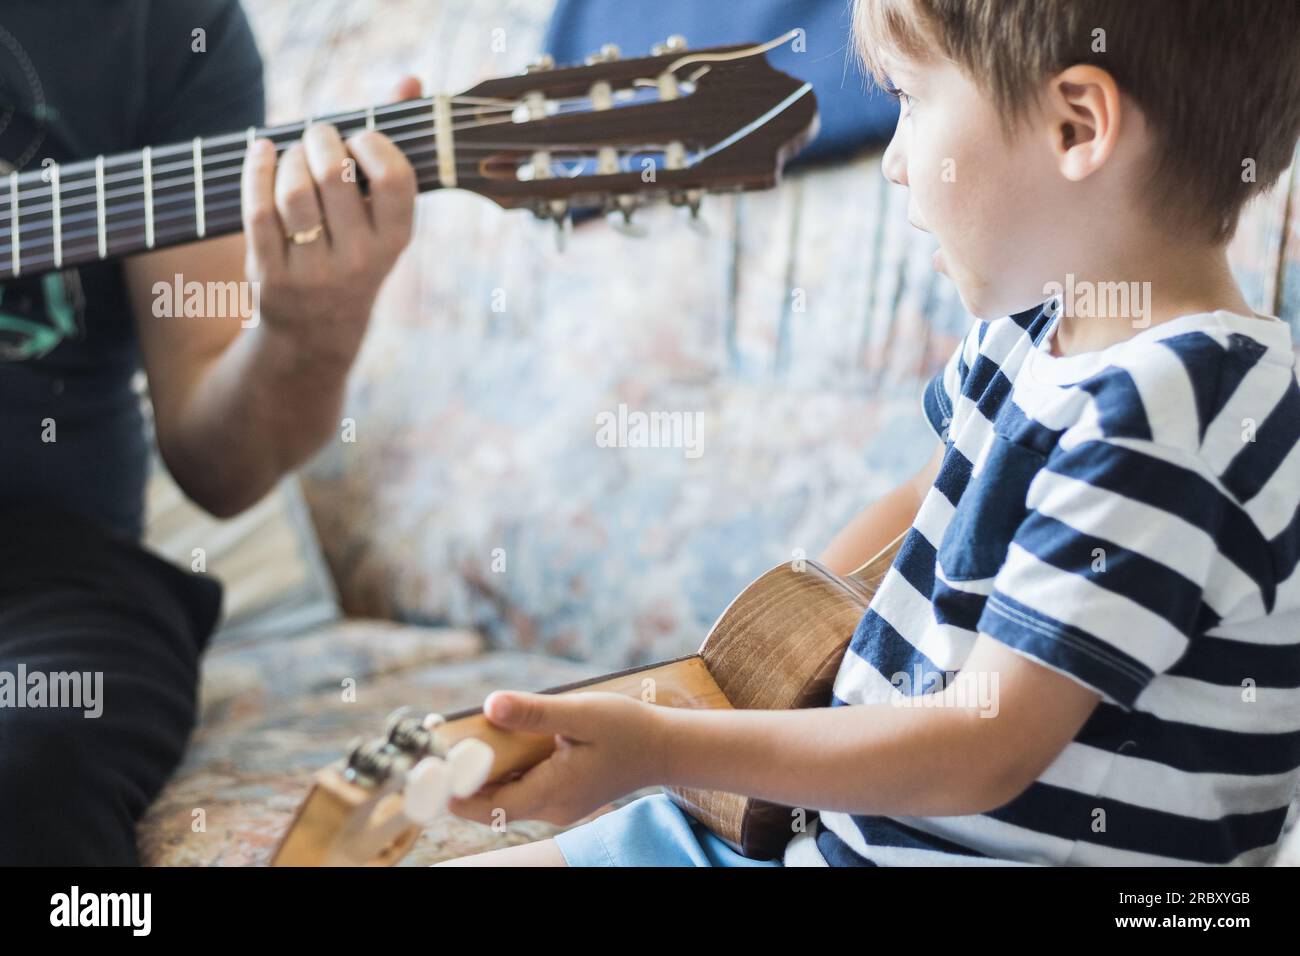 Caucasian child playing and making music chords with small guitar or ukulele, close up. Adult person teaching child in a relaxed way. Stock Photo